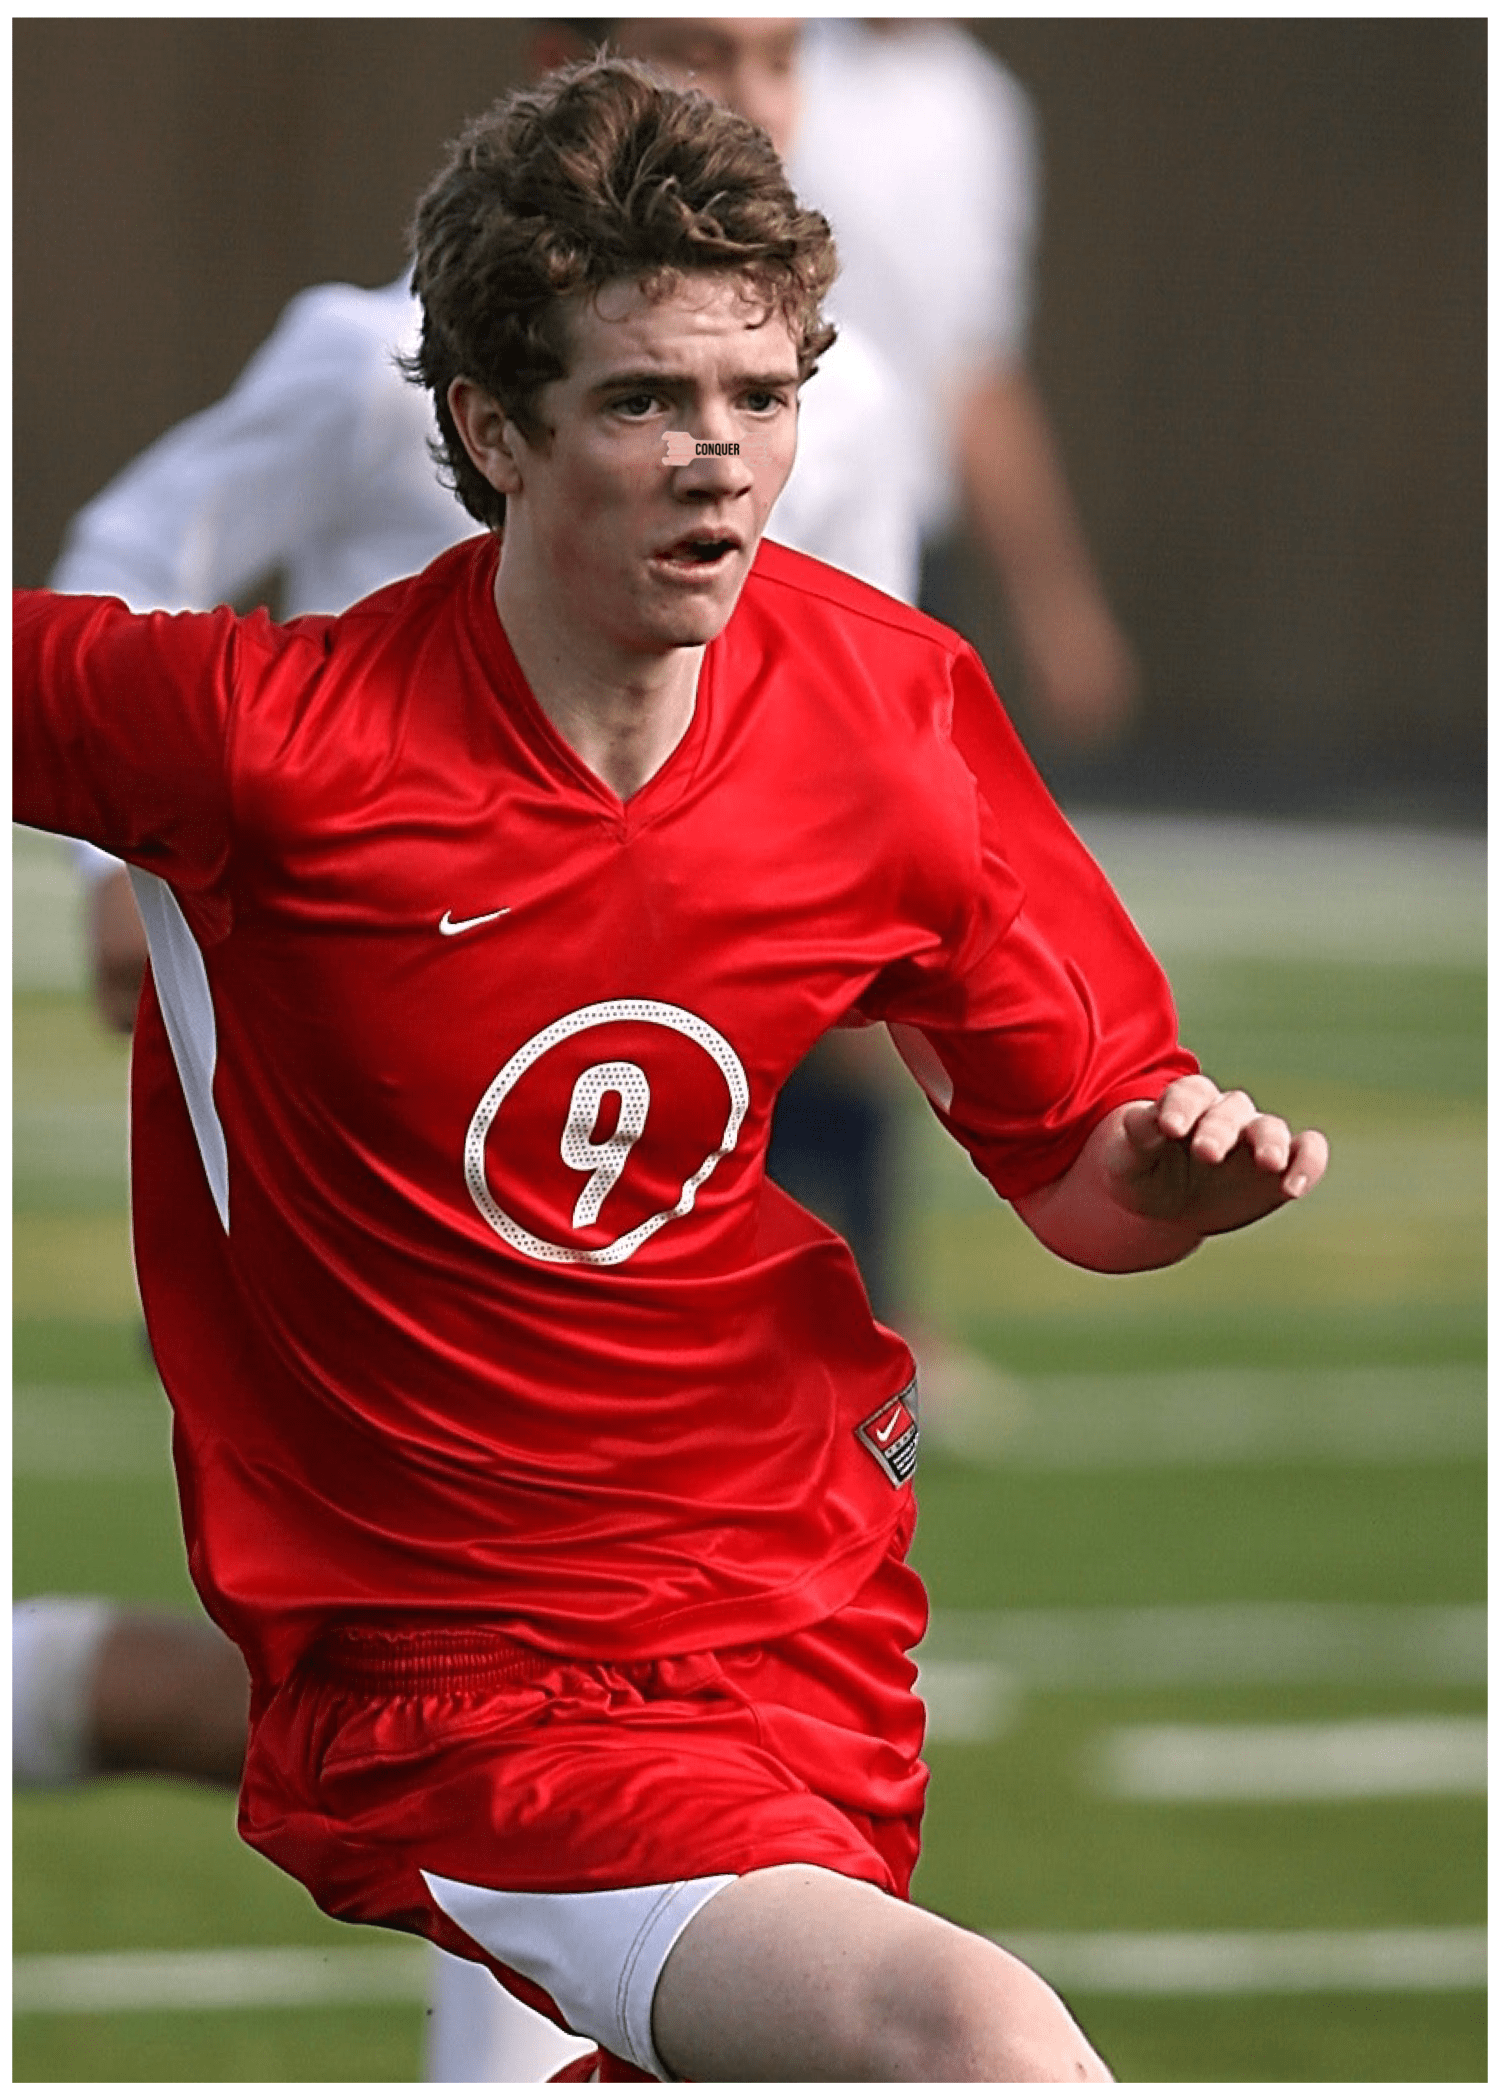 481-soccer-player-wearing-conquer-strips-min---compressed-16782442370356.png